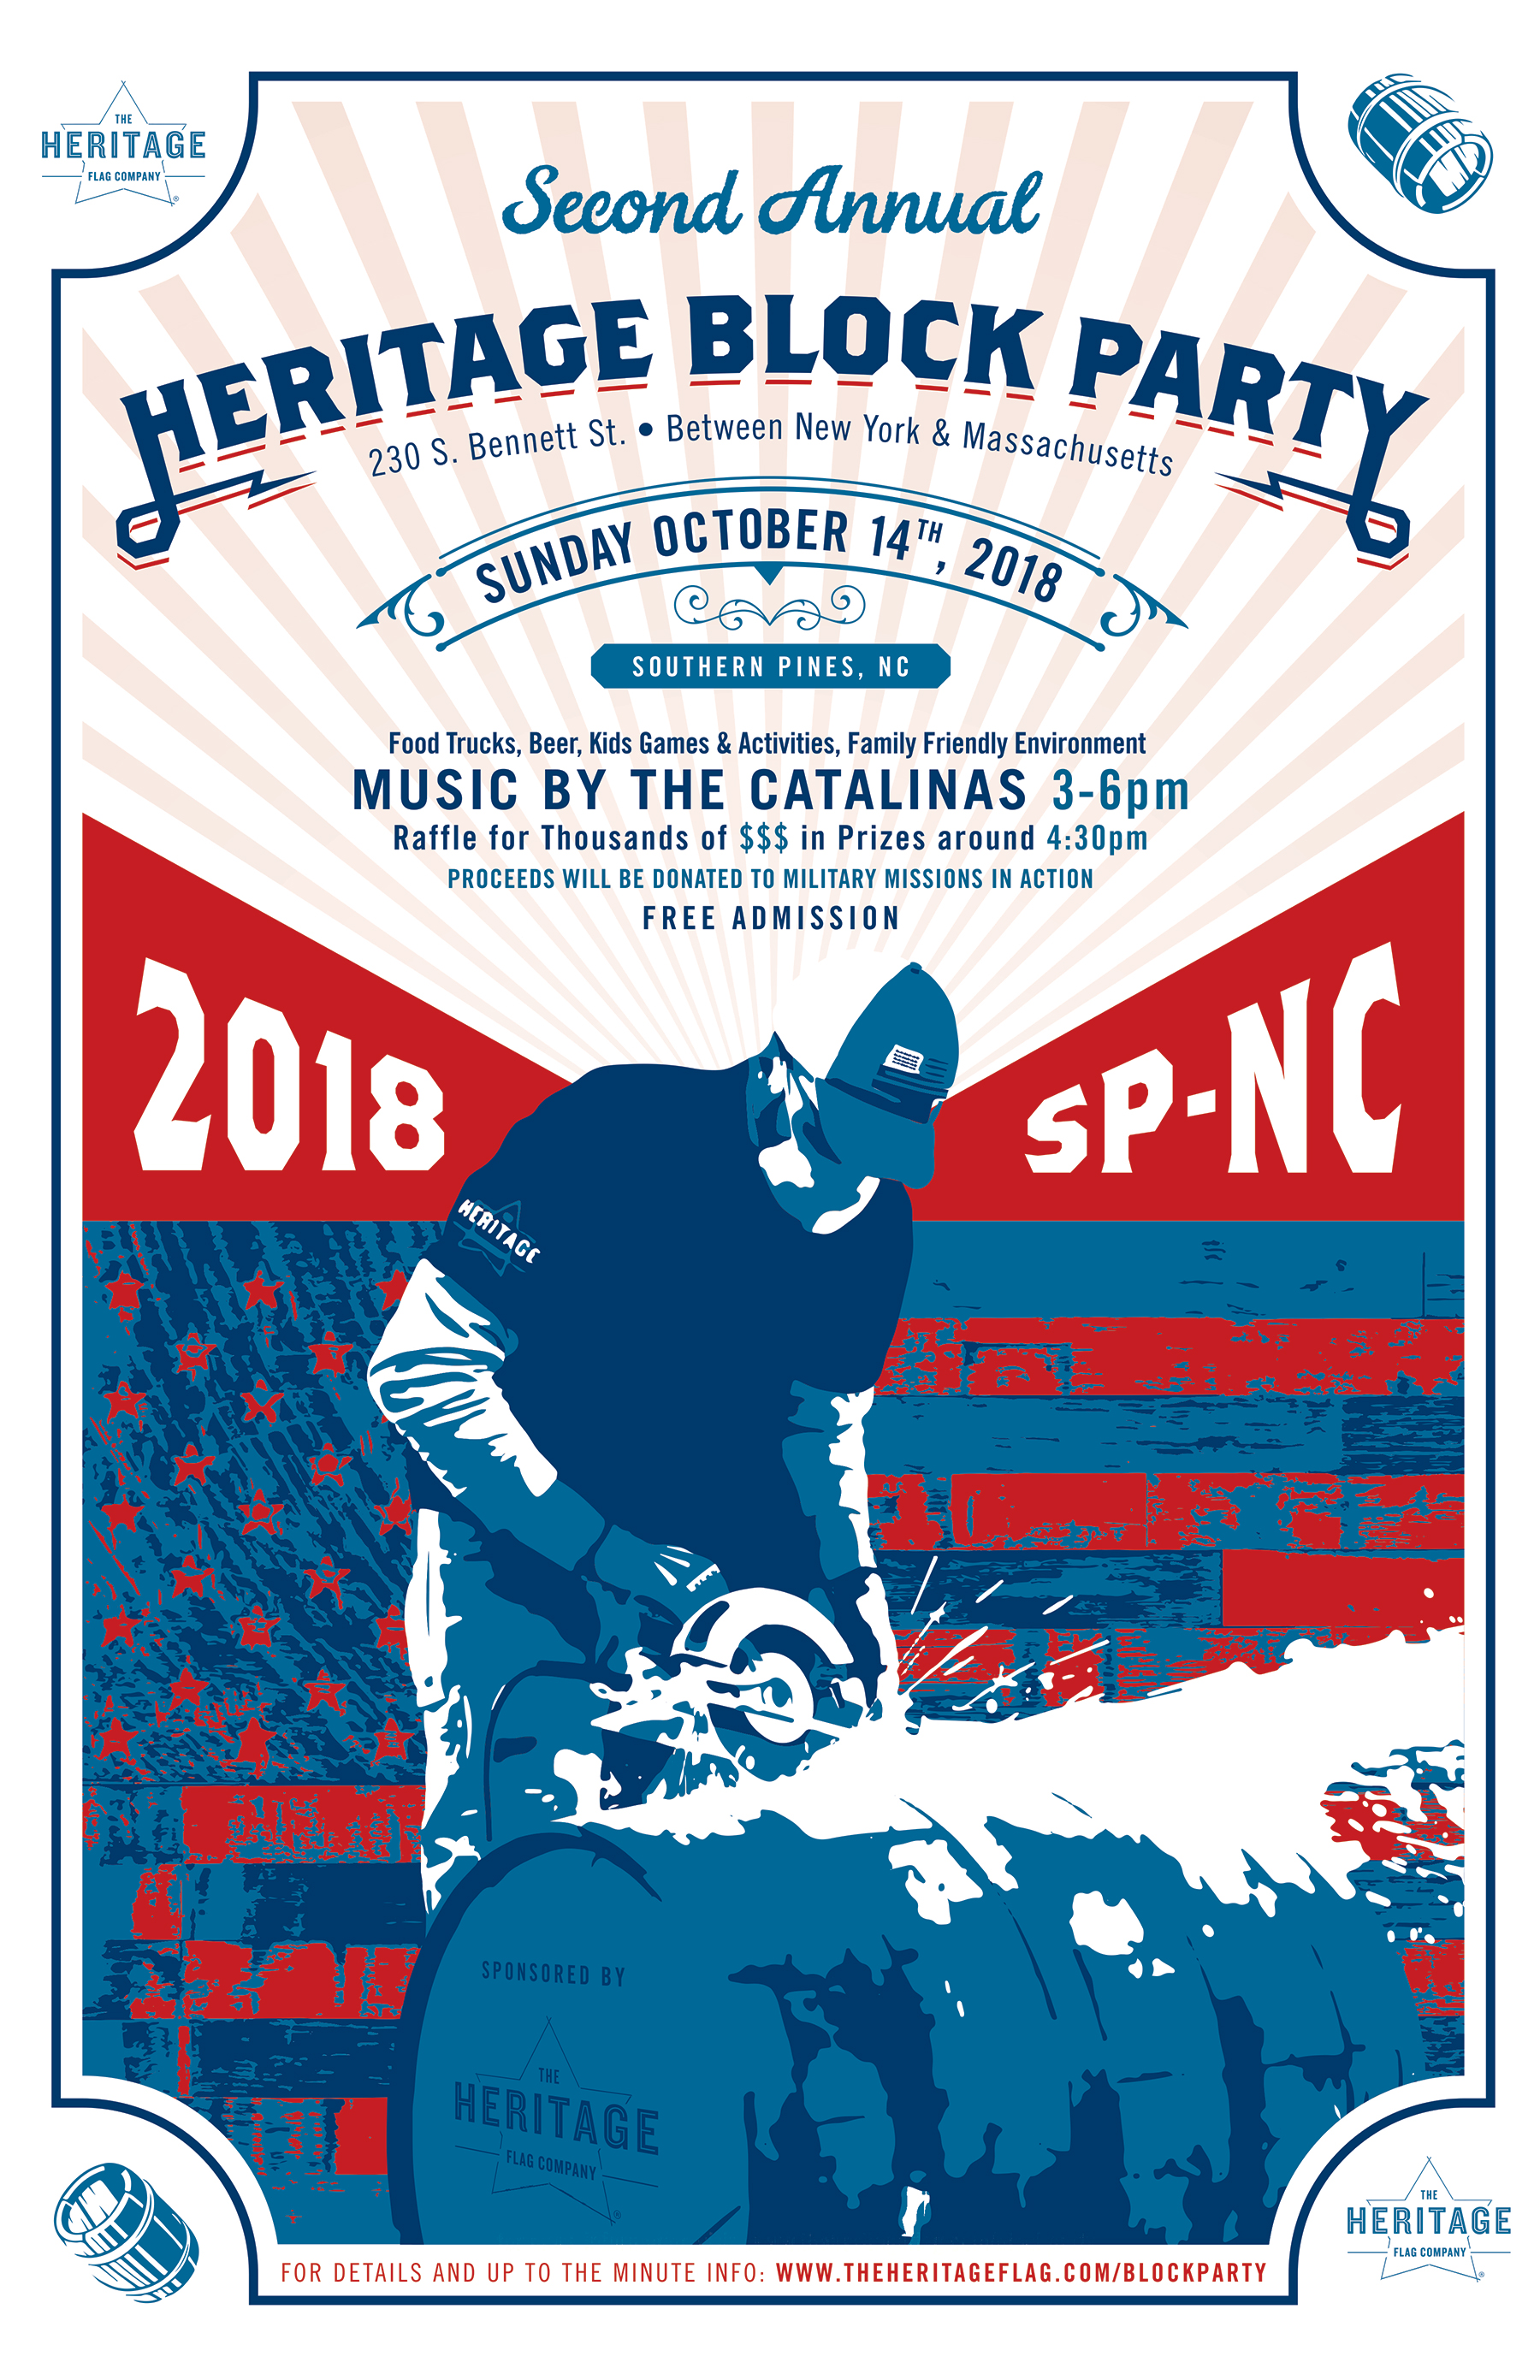 Poster promoting the 2018 Second Annual Block Party